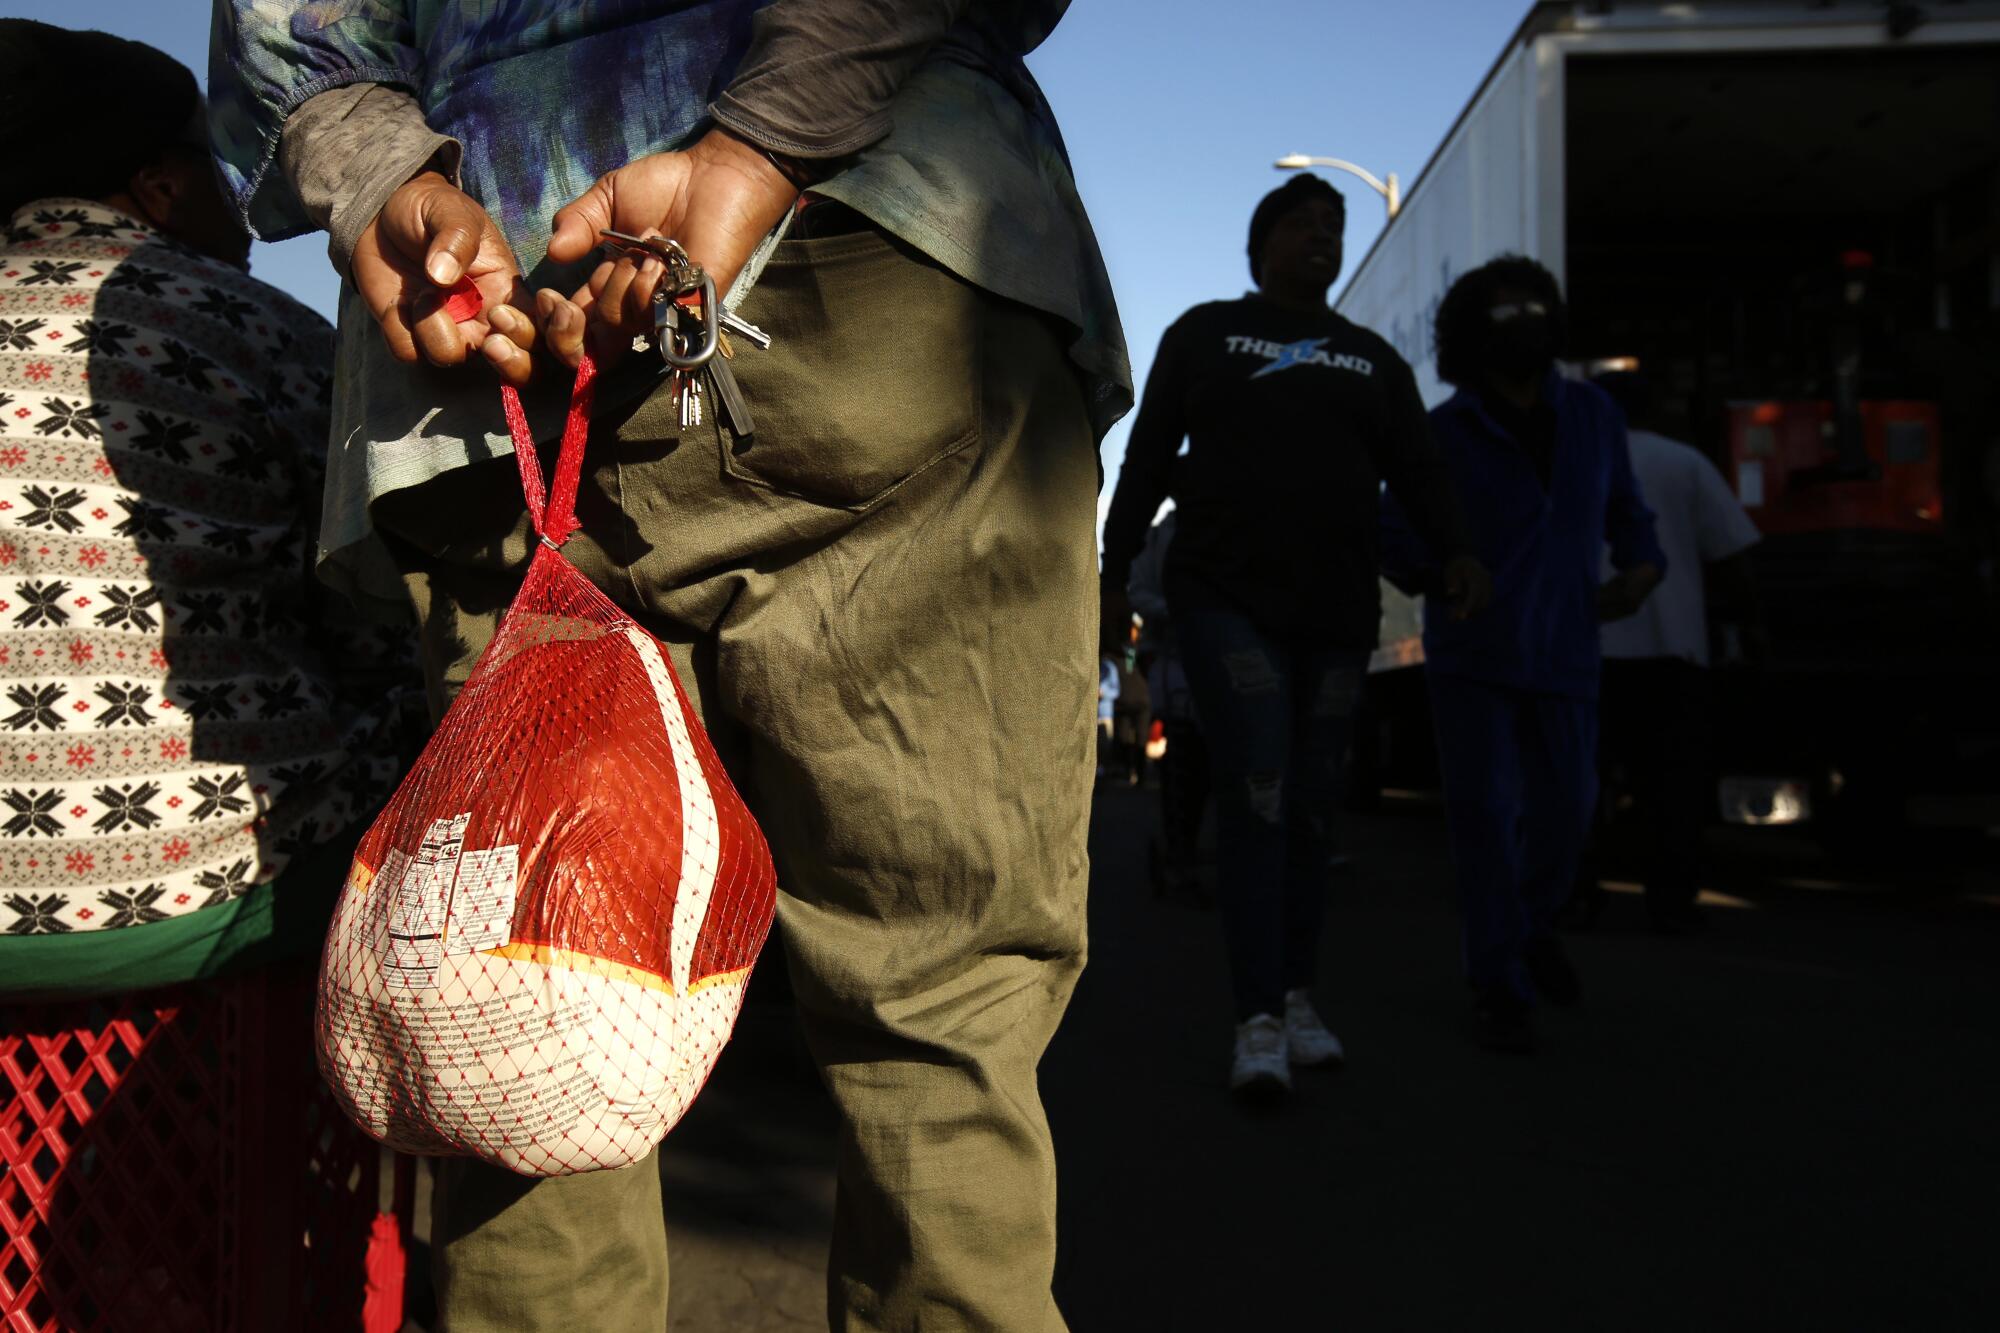 A wrapped turkey hangs from hands behind a person outdoors.